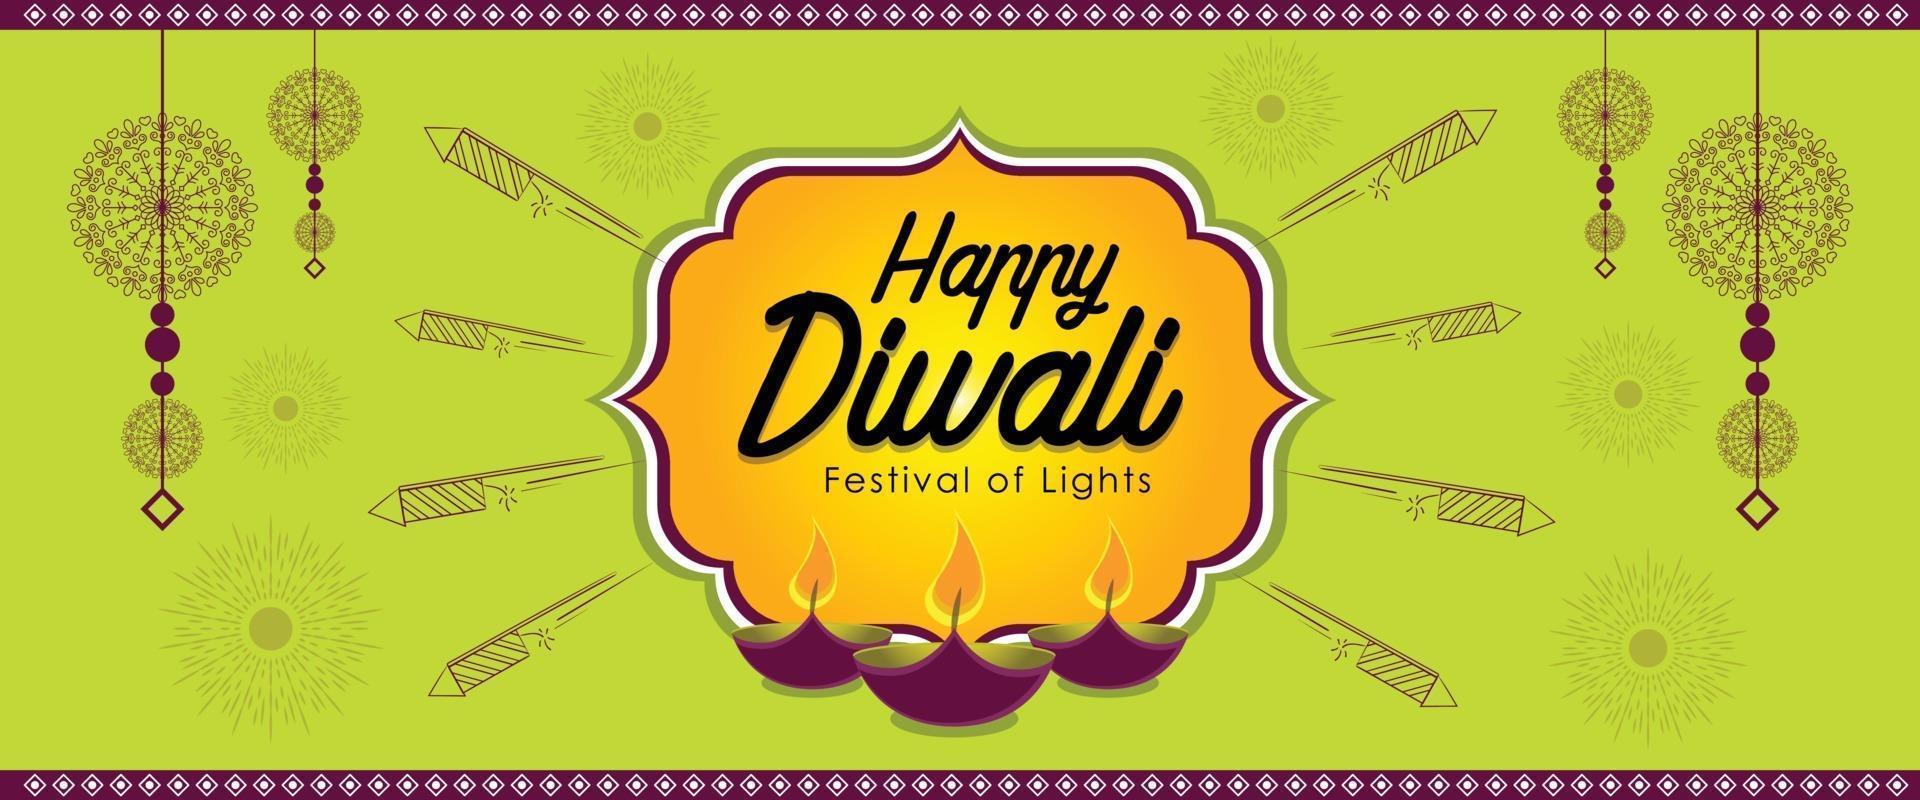 Beautiful Happy Diwali vector banner for free download